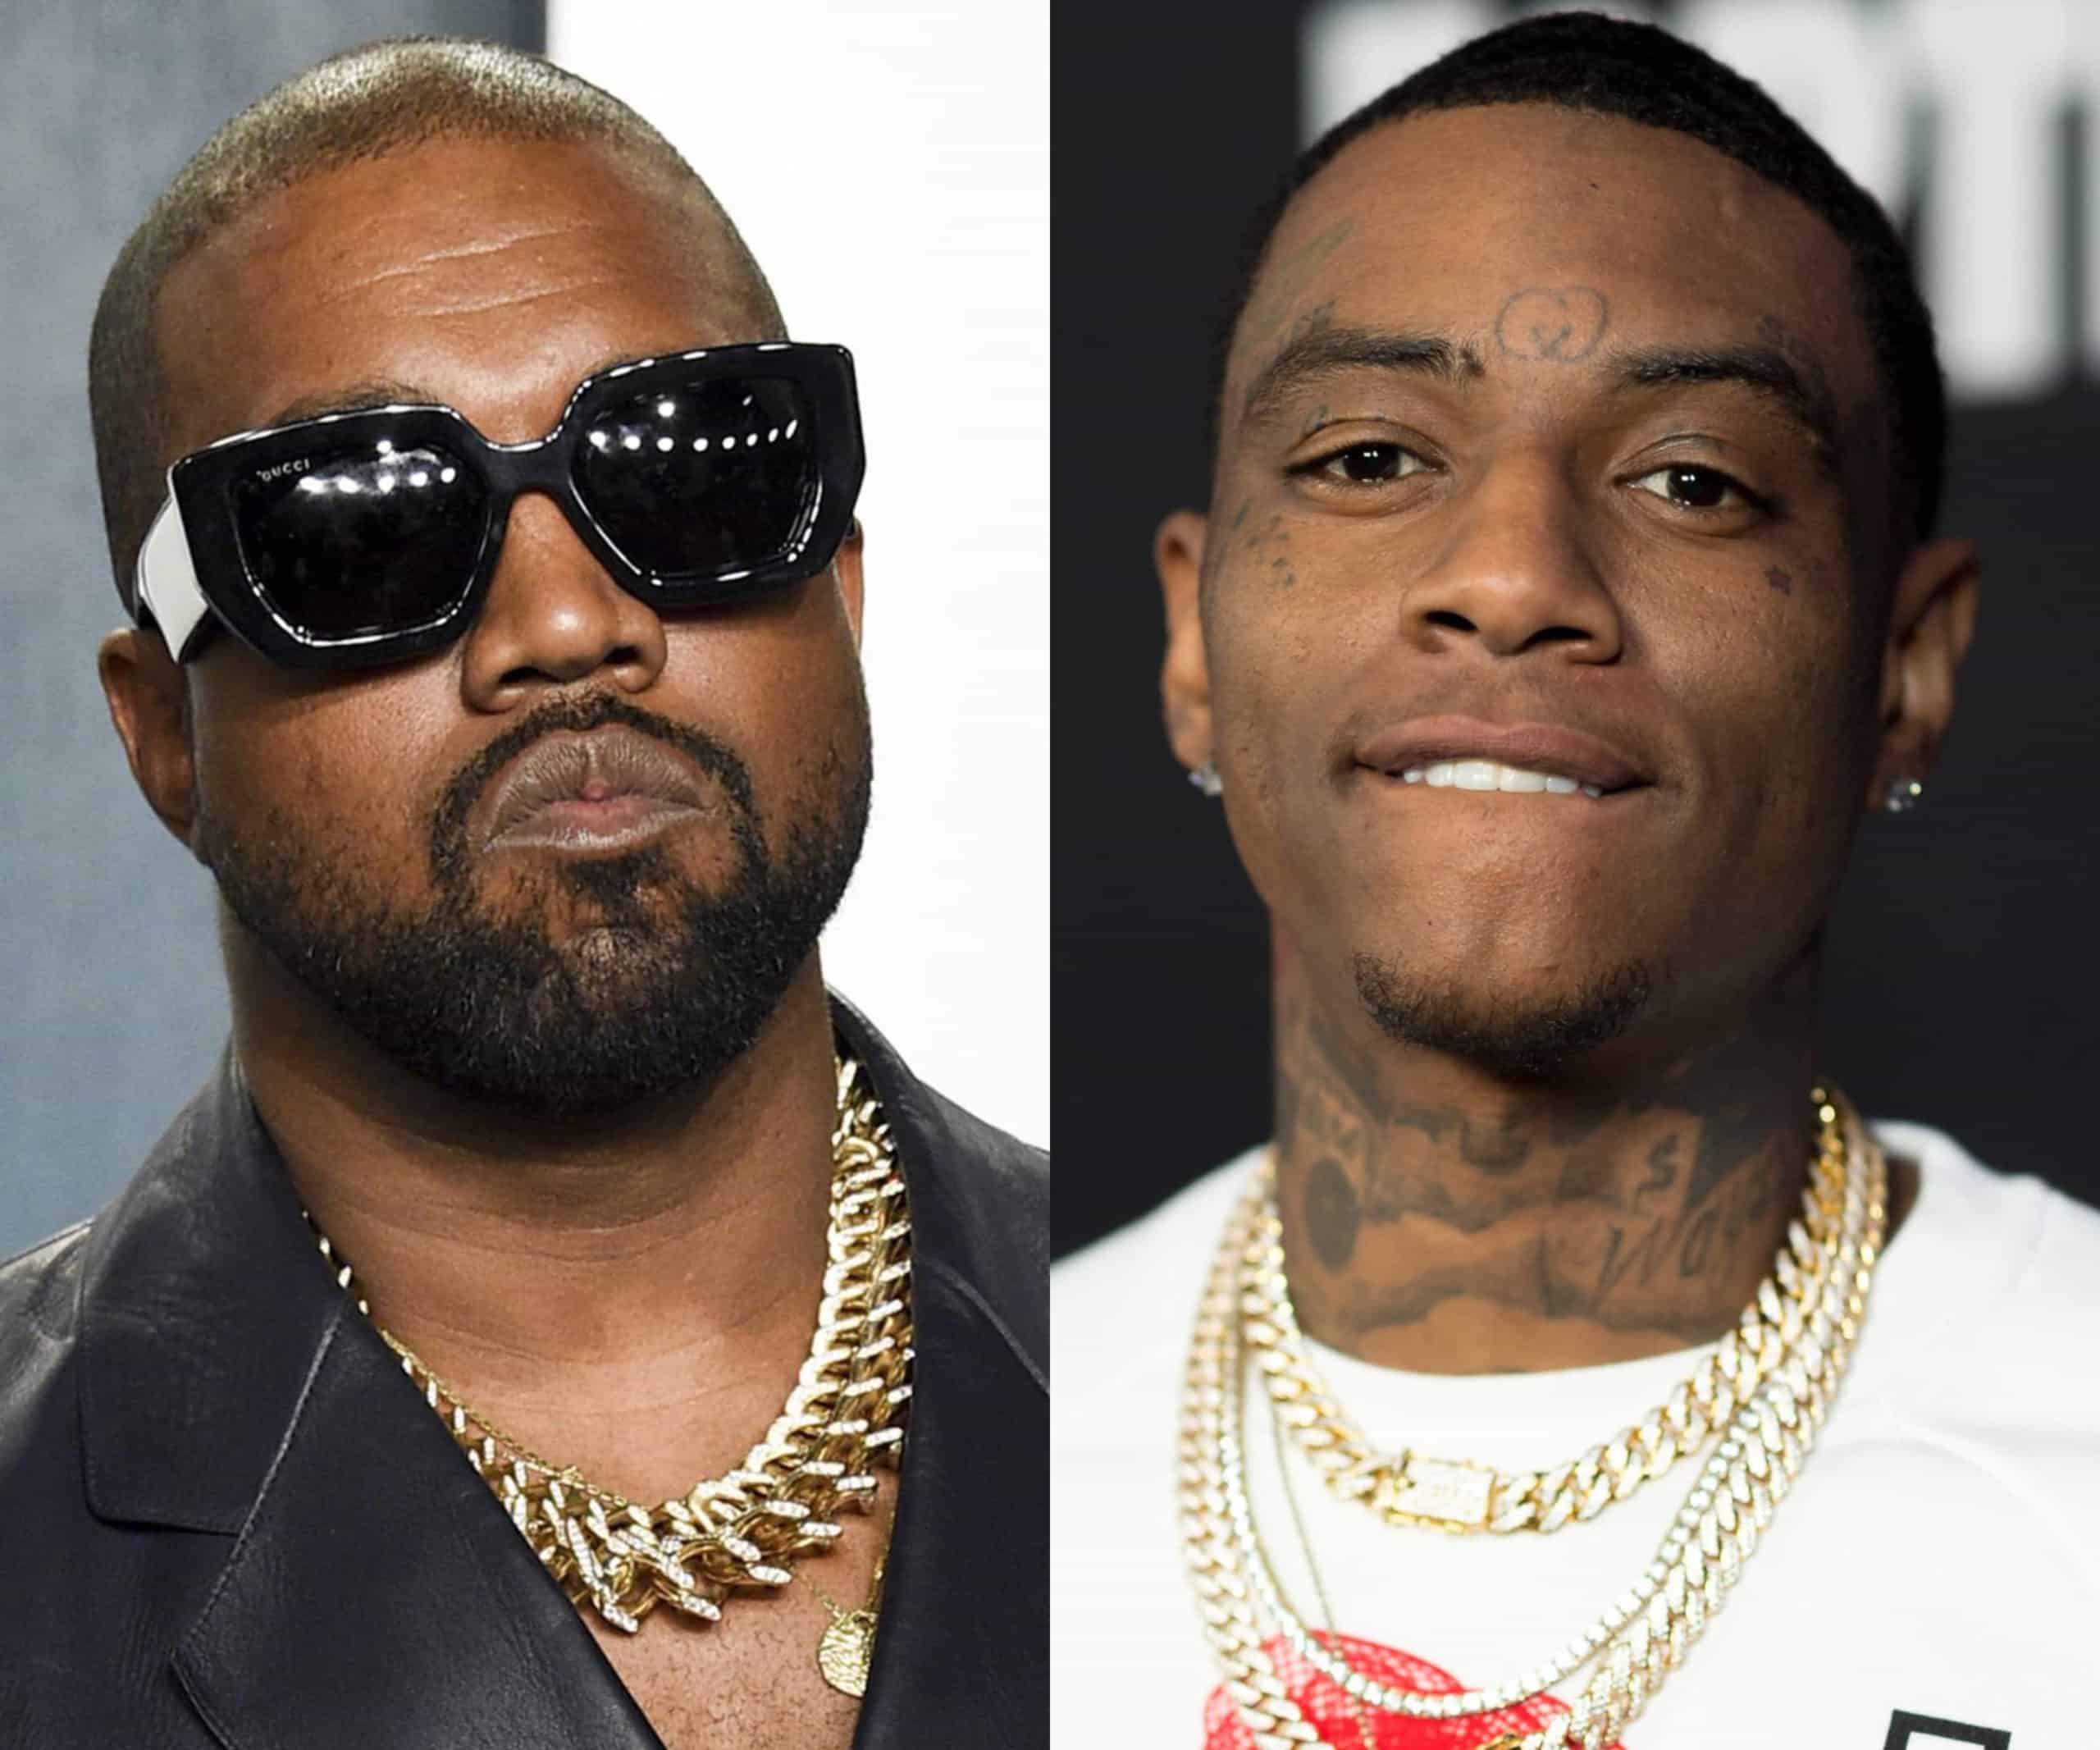 Kanye West Reaches Out To Soulja Boy To Squash Their Feud